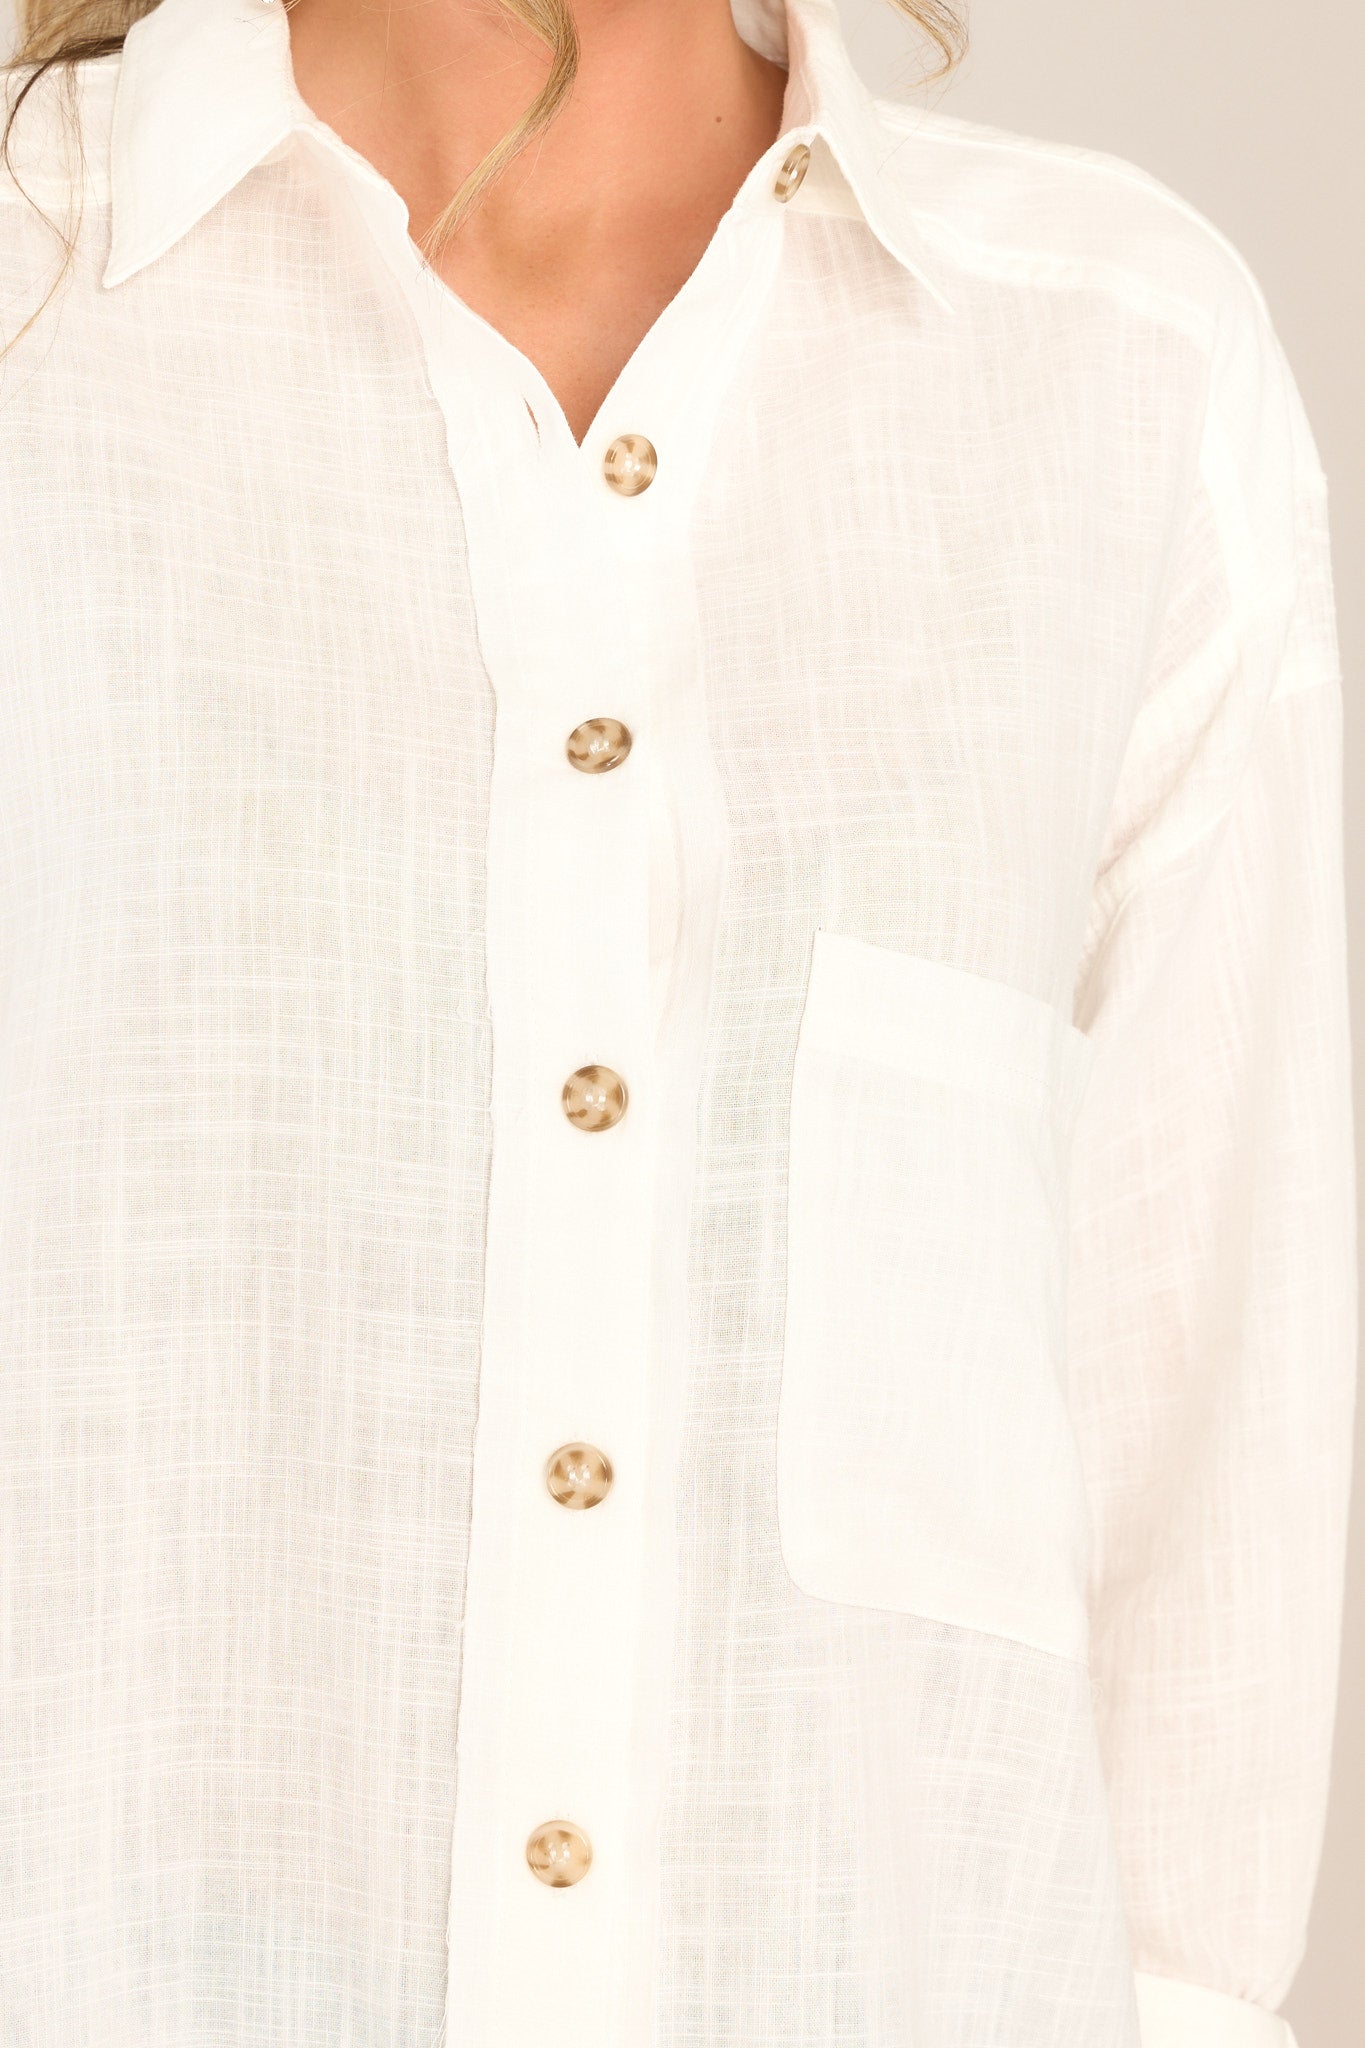 Close-up detailed view of top that features a collared neckline, functional buttons, and a front side pocket.